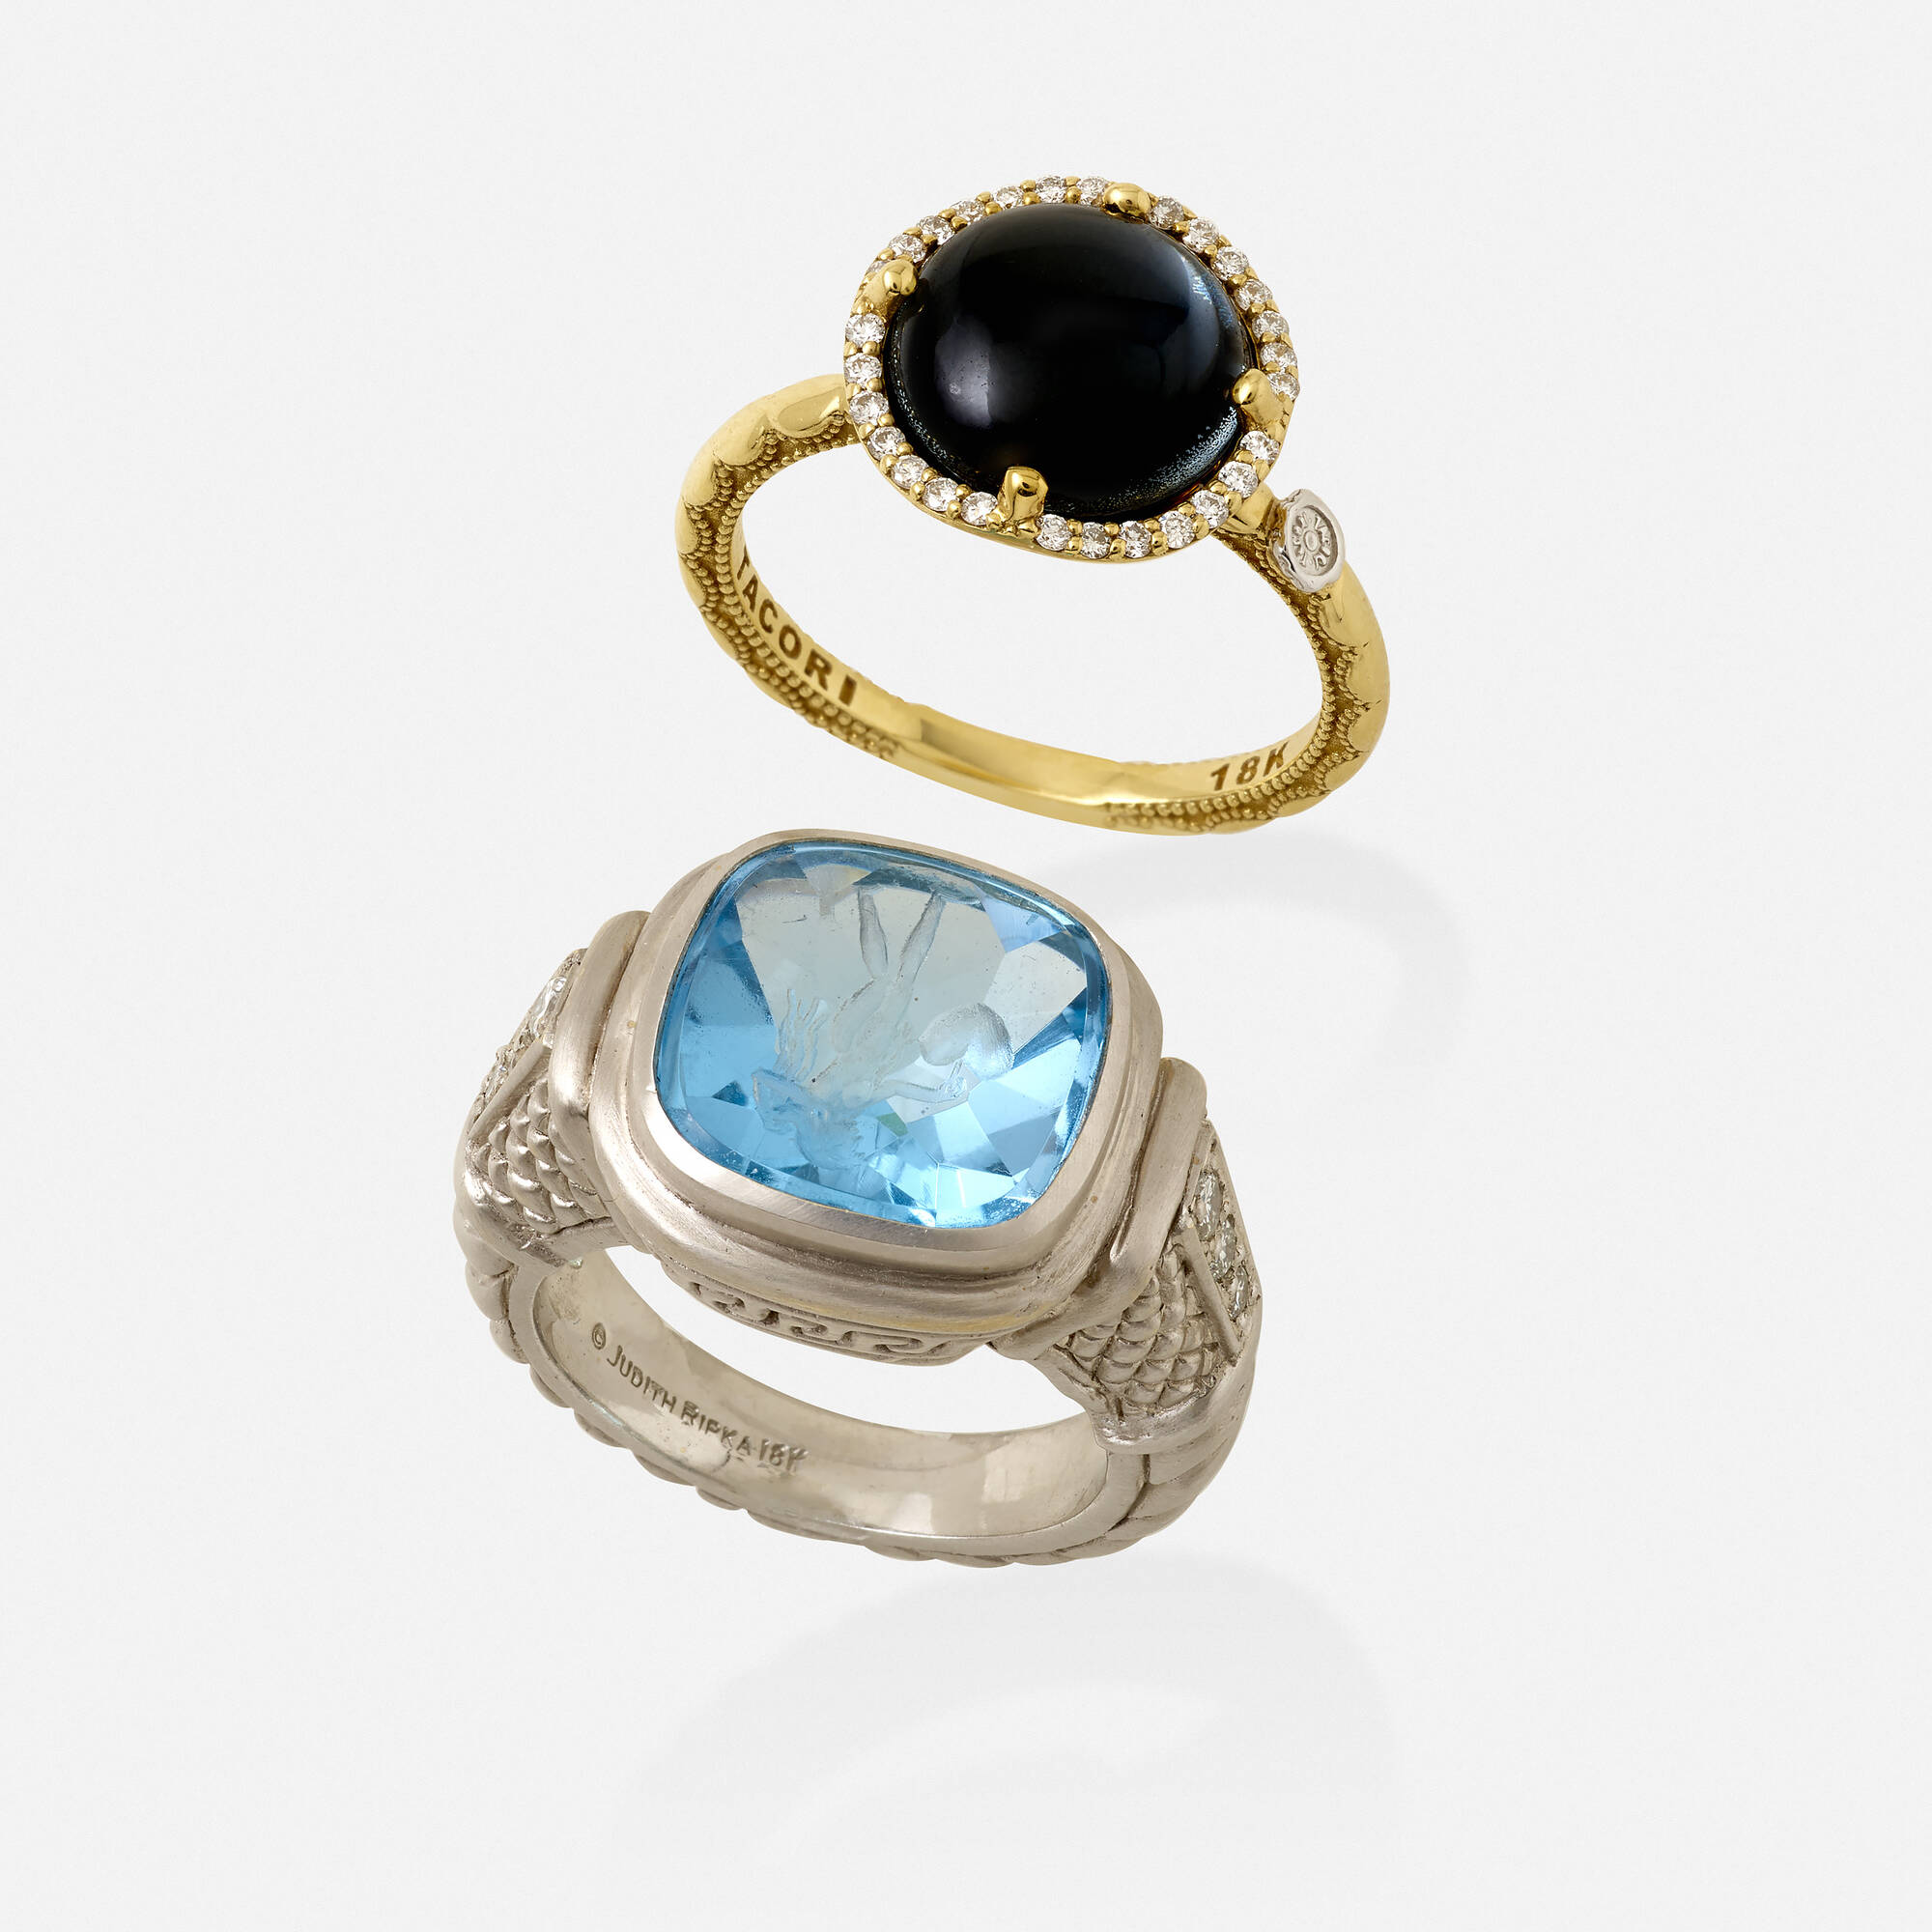 https://www.ragoarts.com/items/index/2000/354_1_jewels_a_prominent_store_collection_september_2021_judith_ripka_blue_topaz_ring_and_tacori_gem_set_ring__rago_auction.jpg?t=1692918362